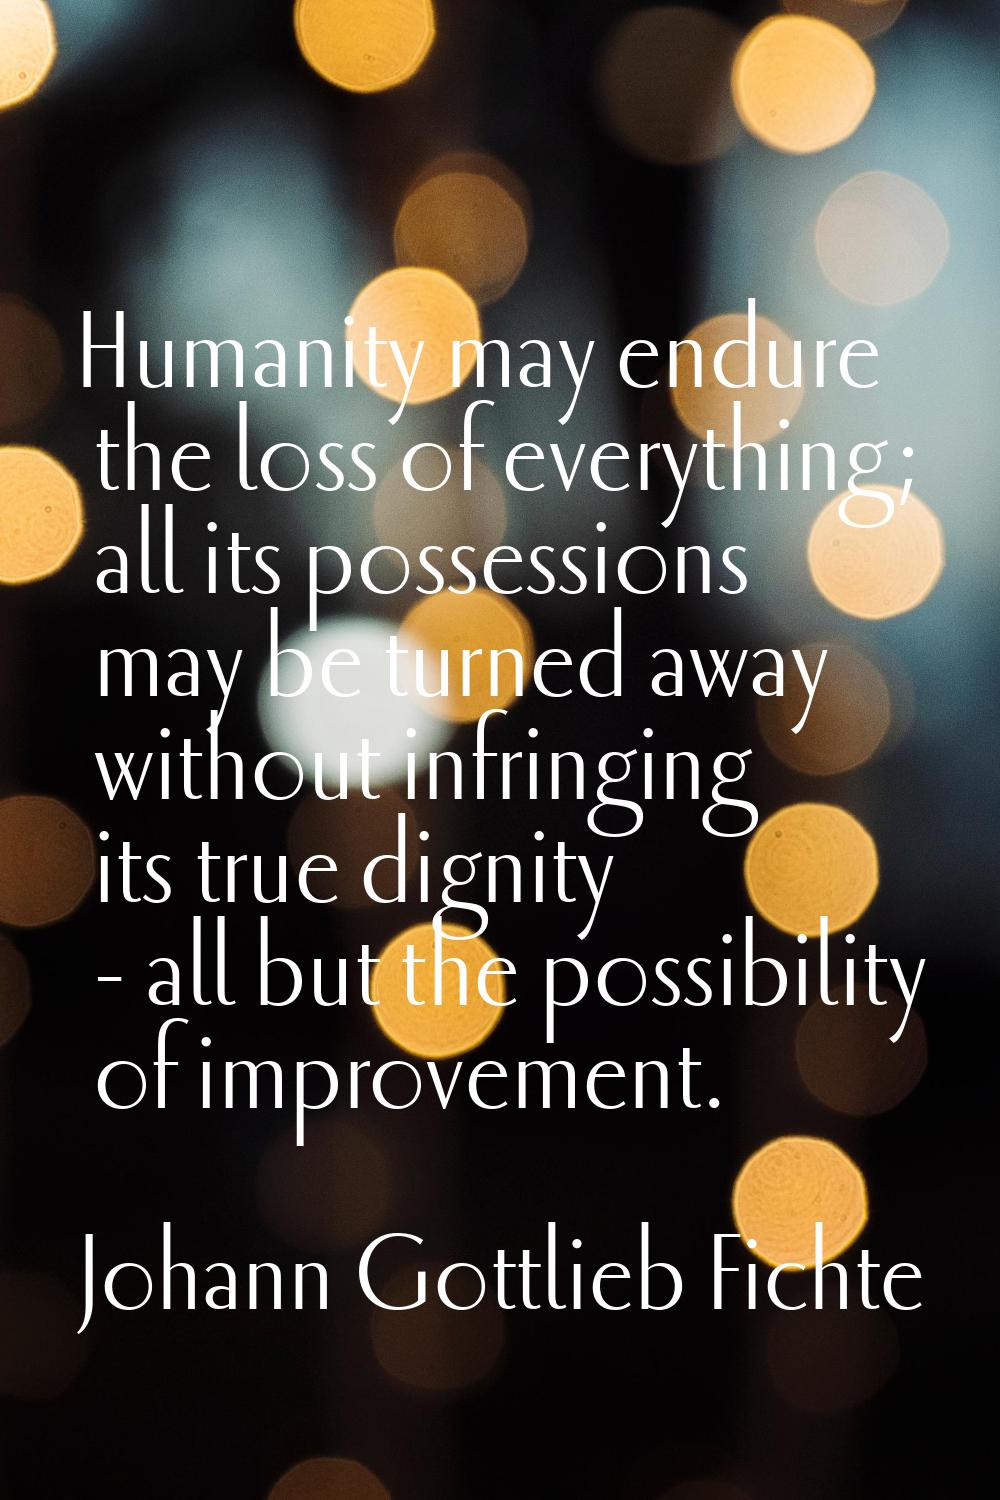 Humanity may endure the loss of everything; all its possessions may be turned away without infringi